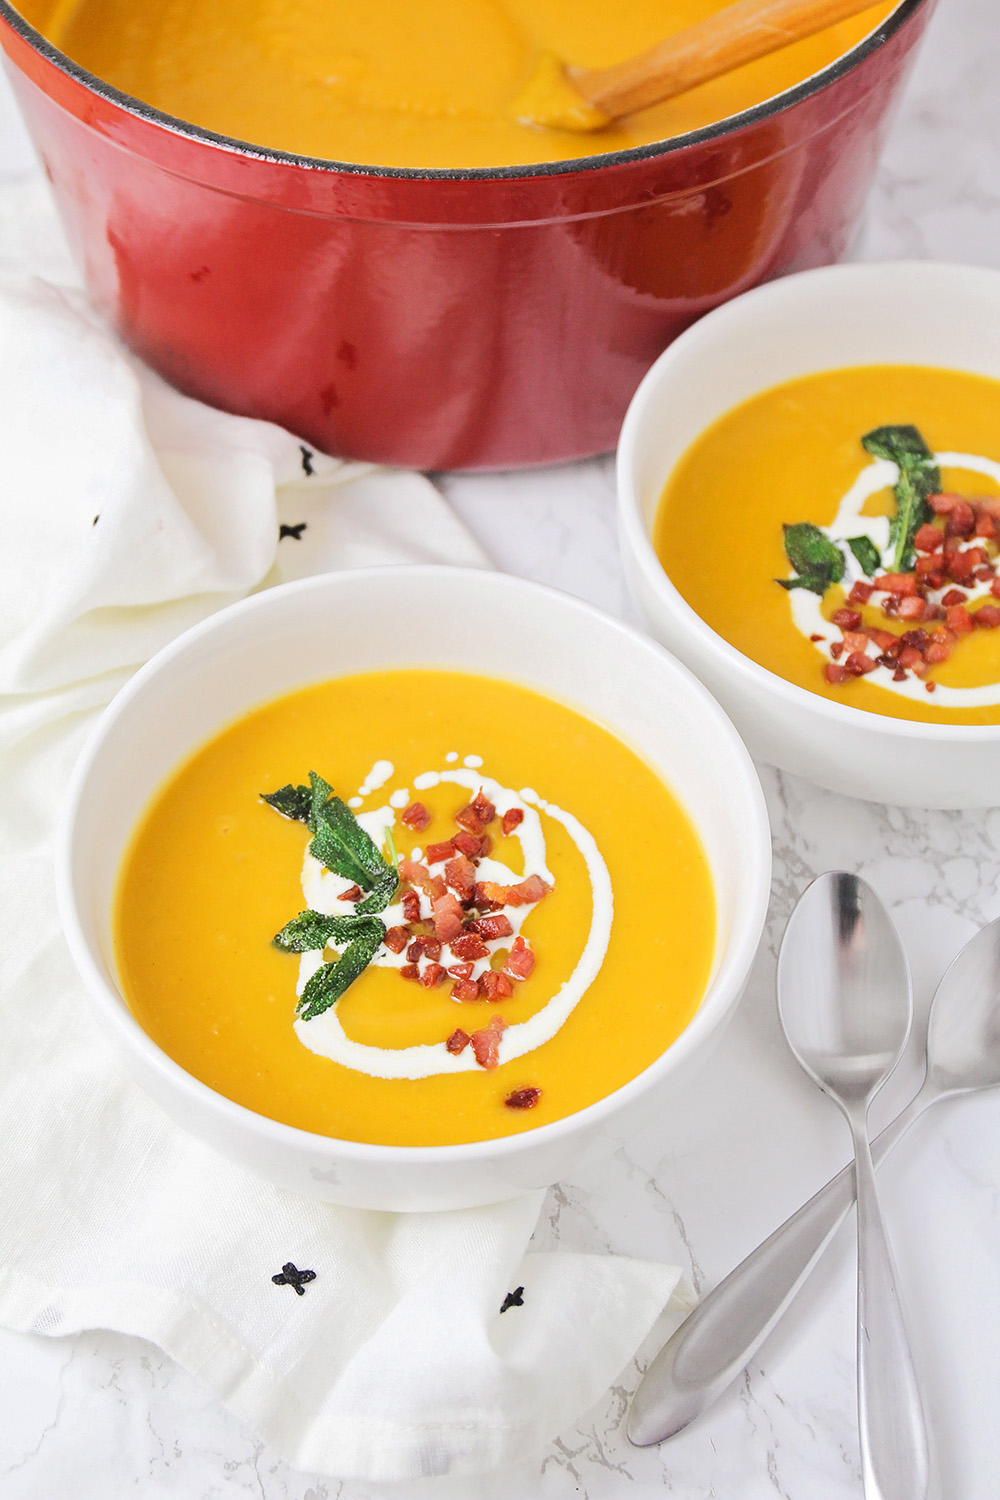 This delicious and flavorful butternut squash soup has a silky smooth texture, and is so easy to make!